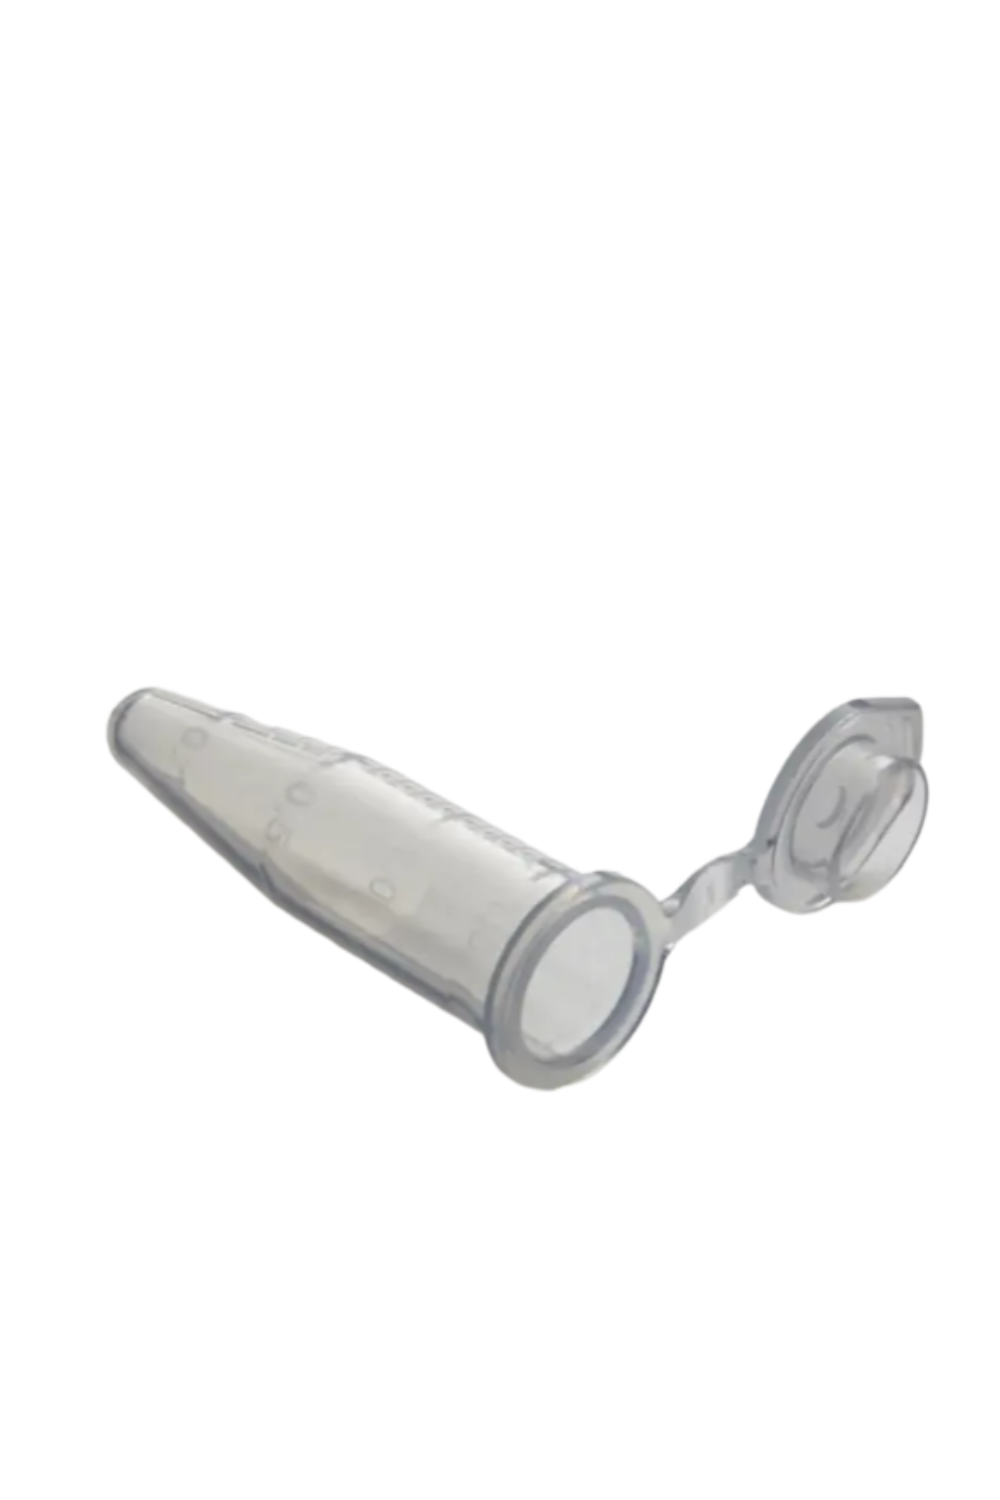 1.5 ml Ultra High Recovery Microcentrifuge Tube (Overpack of 10 x 250) (E1415-2600)